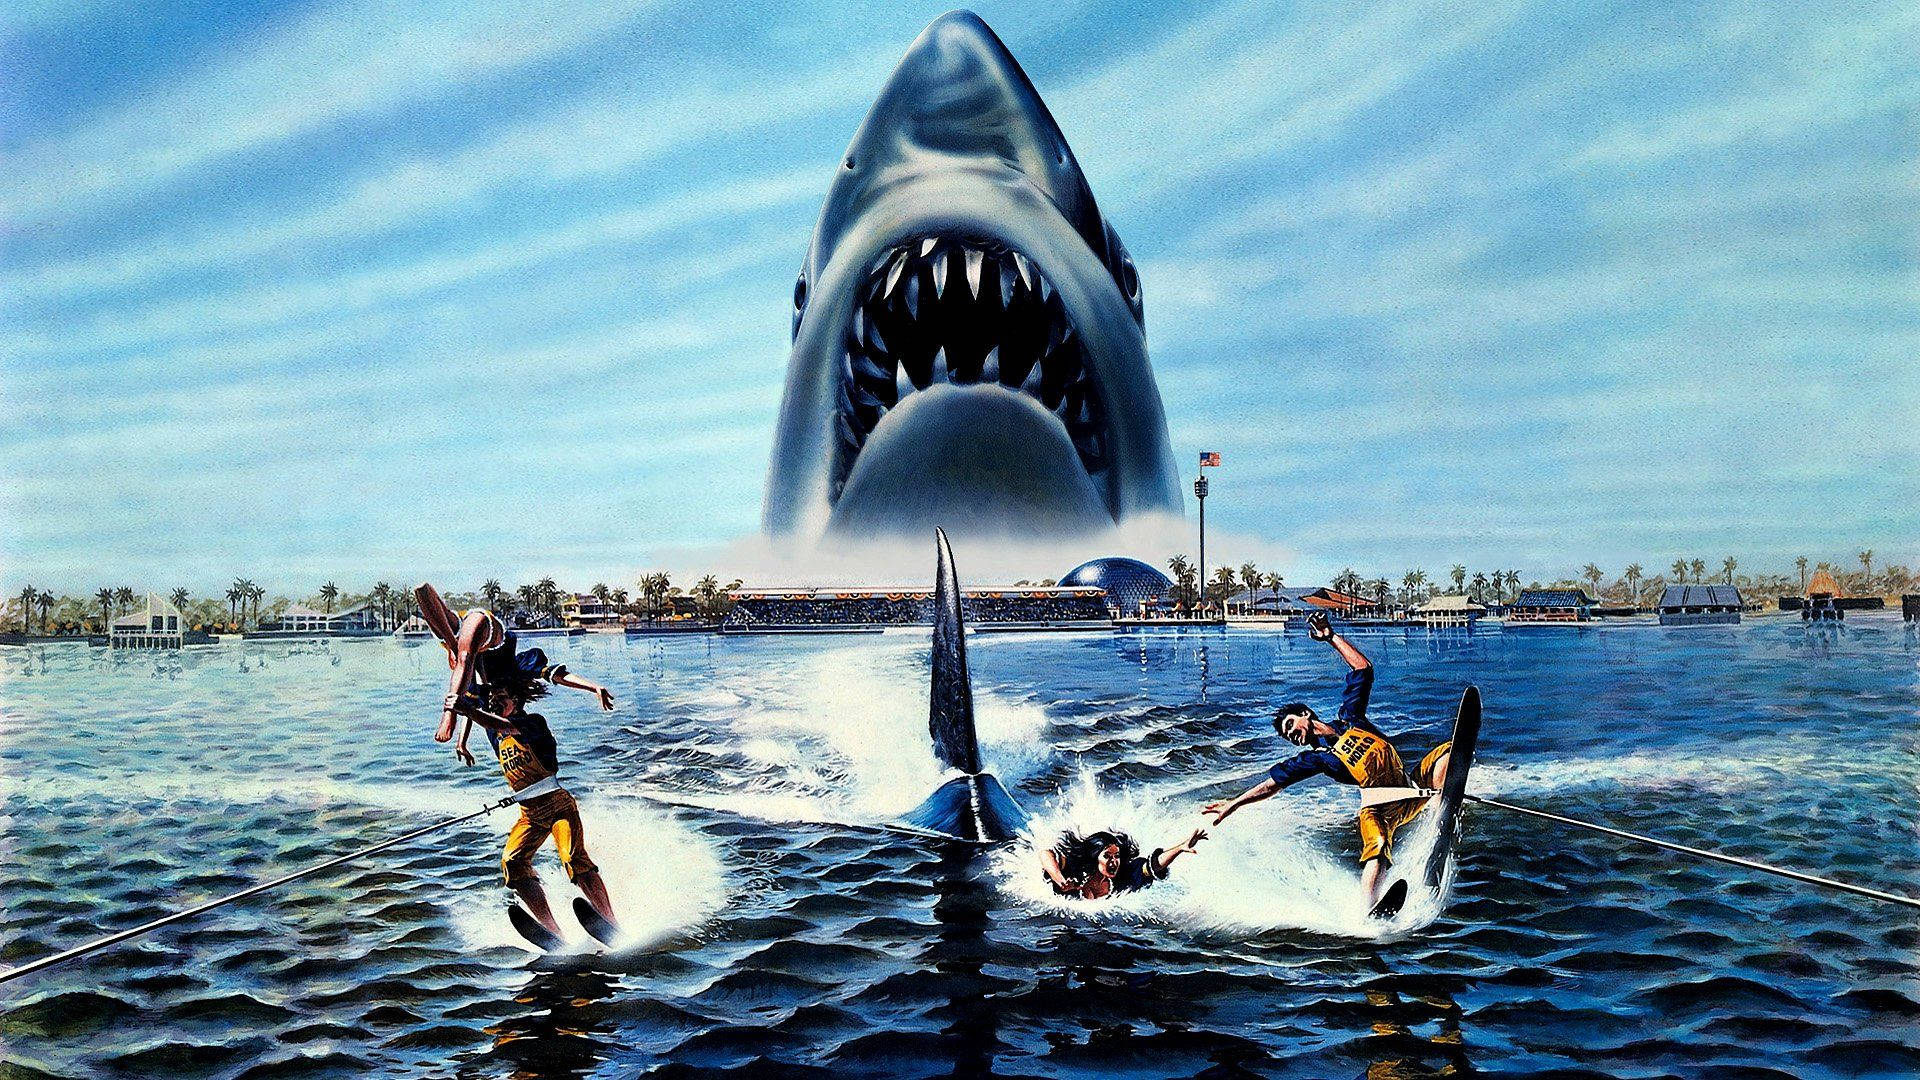 Jaws 3 The Movie Background